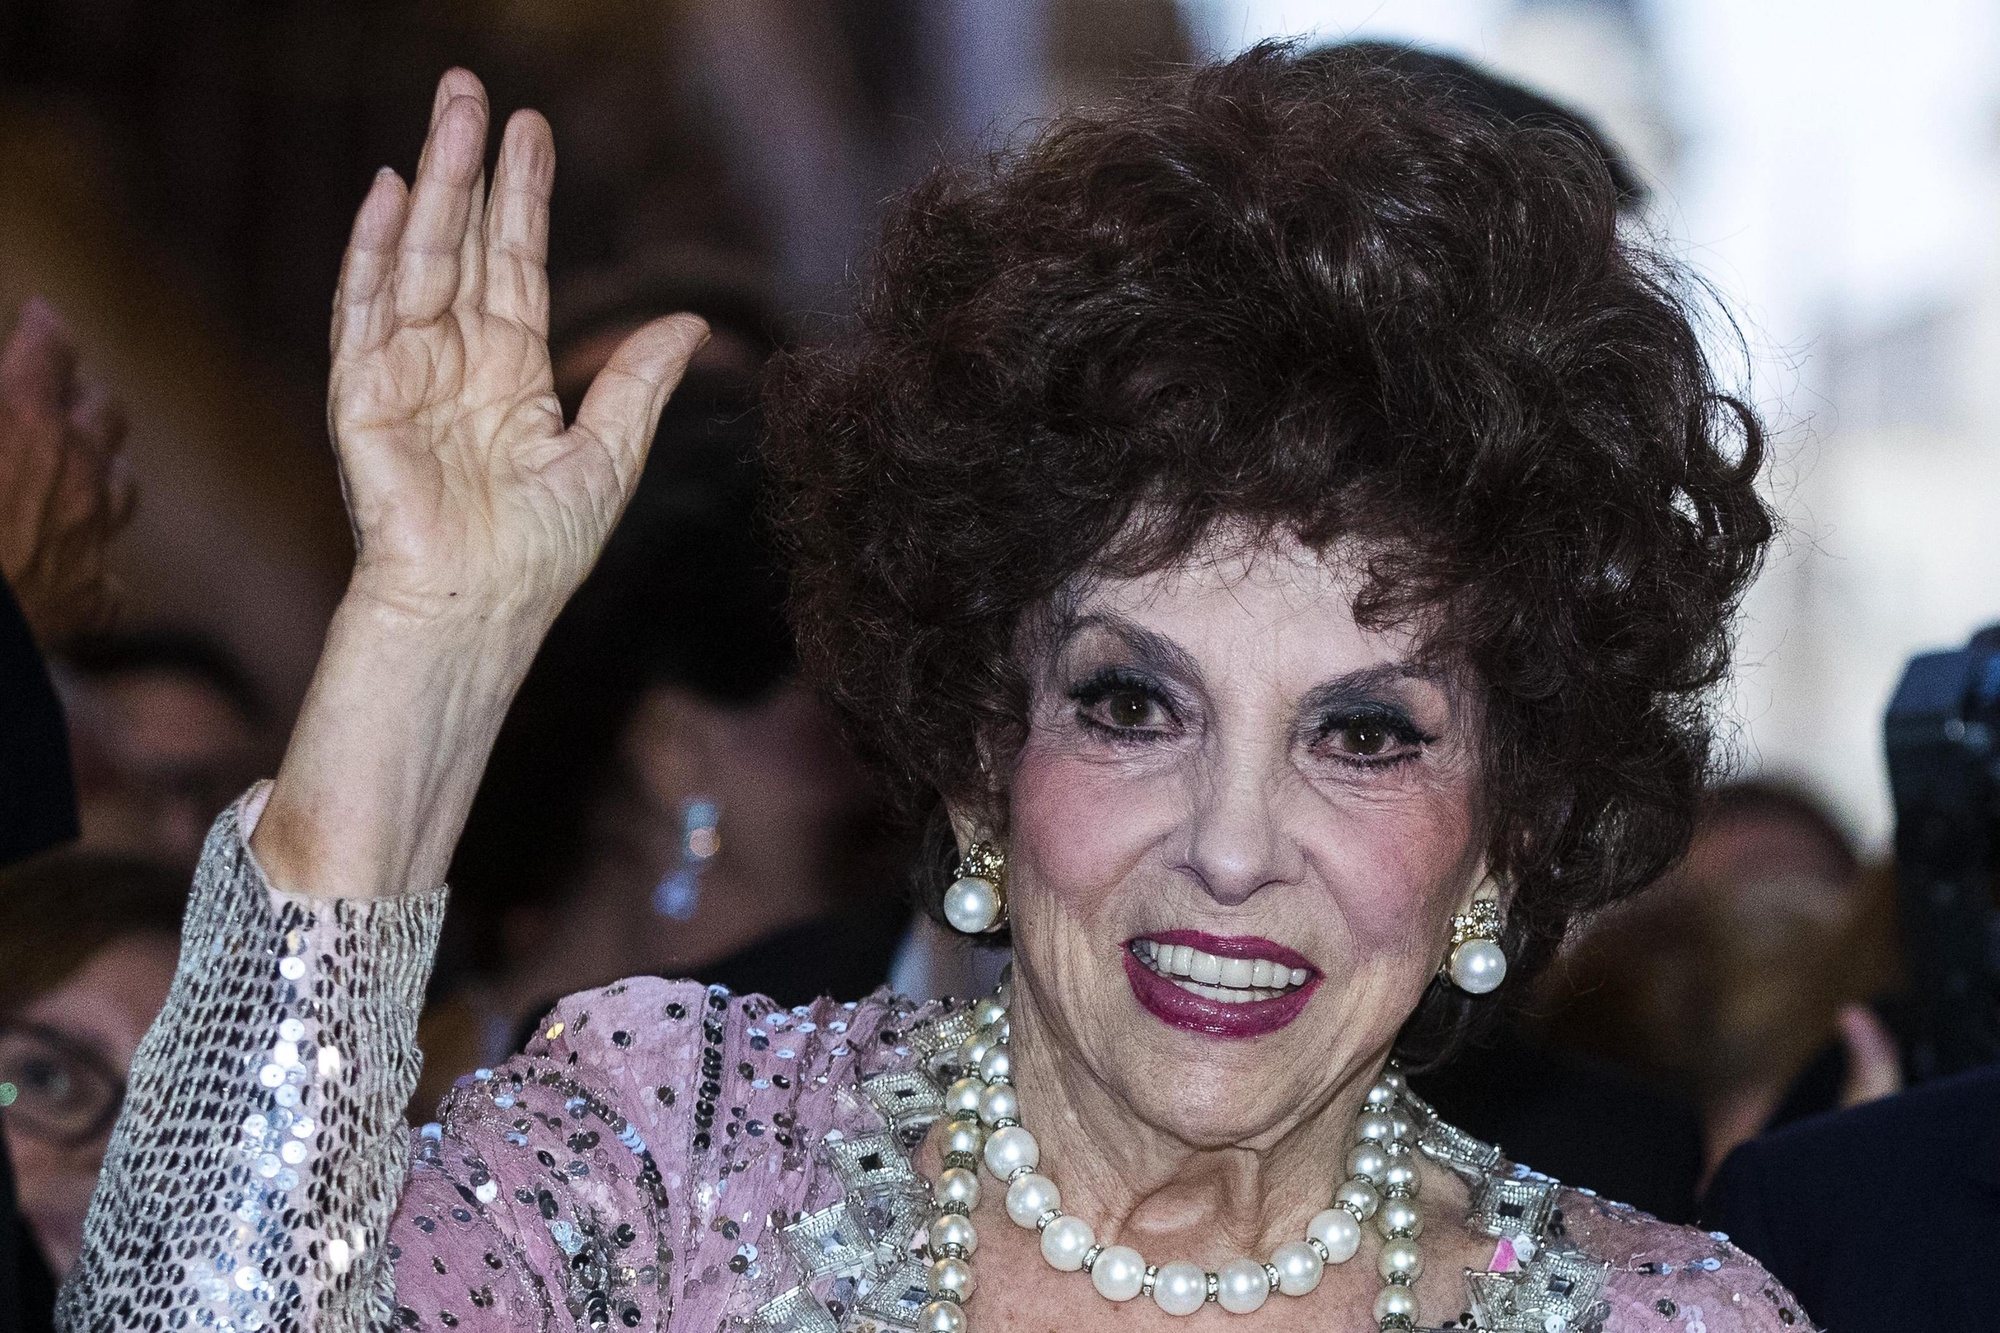 epa10408909 FILE Italian actress Gina Lollobrigida celebrates her 90th birthday during an event in downtown Rome, Italy, 04 July 2017 (reissued 16 January 2023). Lollobrigida, a high profile European actress in the 1950s and early 1960s, has died at the age of 95 Corriere della Sera reported 16 January 2023.  EPA/ANGELO CARCONI *** Local Caption *** 53626285